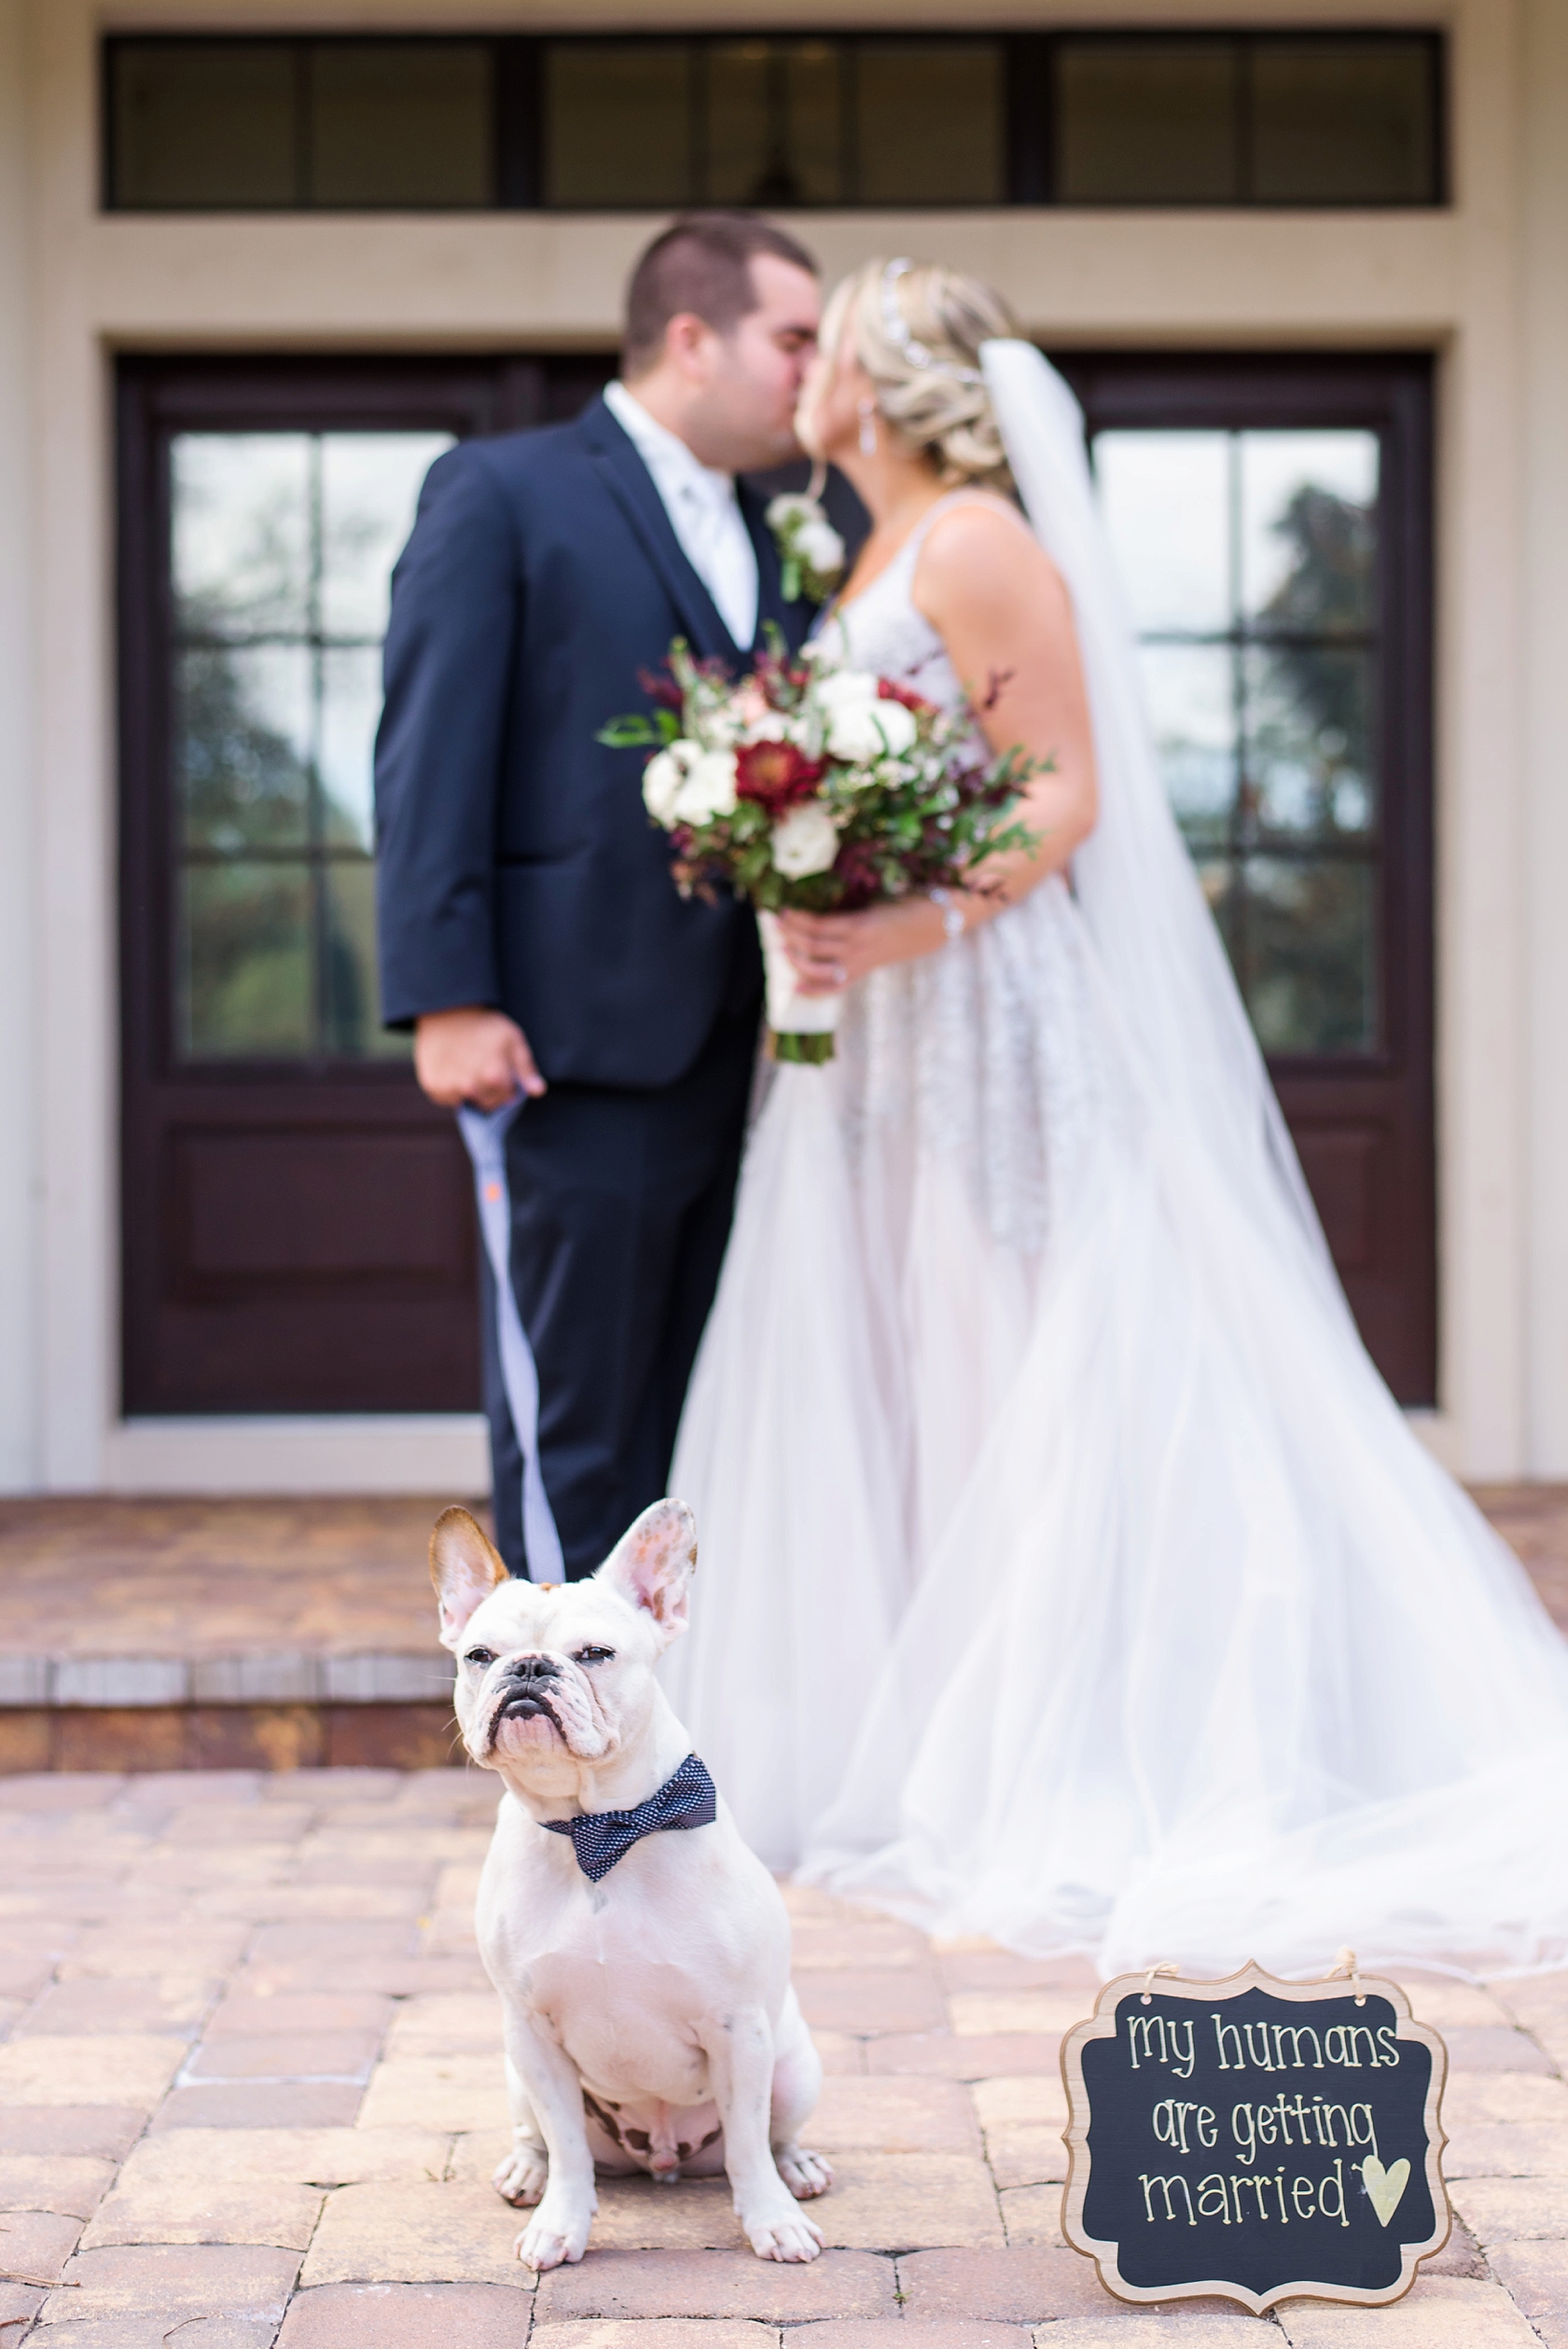 French Bulldog. Hayley Paige gown. Bride and Groom. What else could you want?